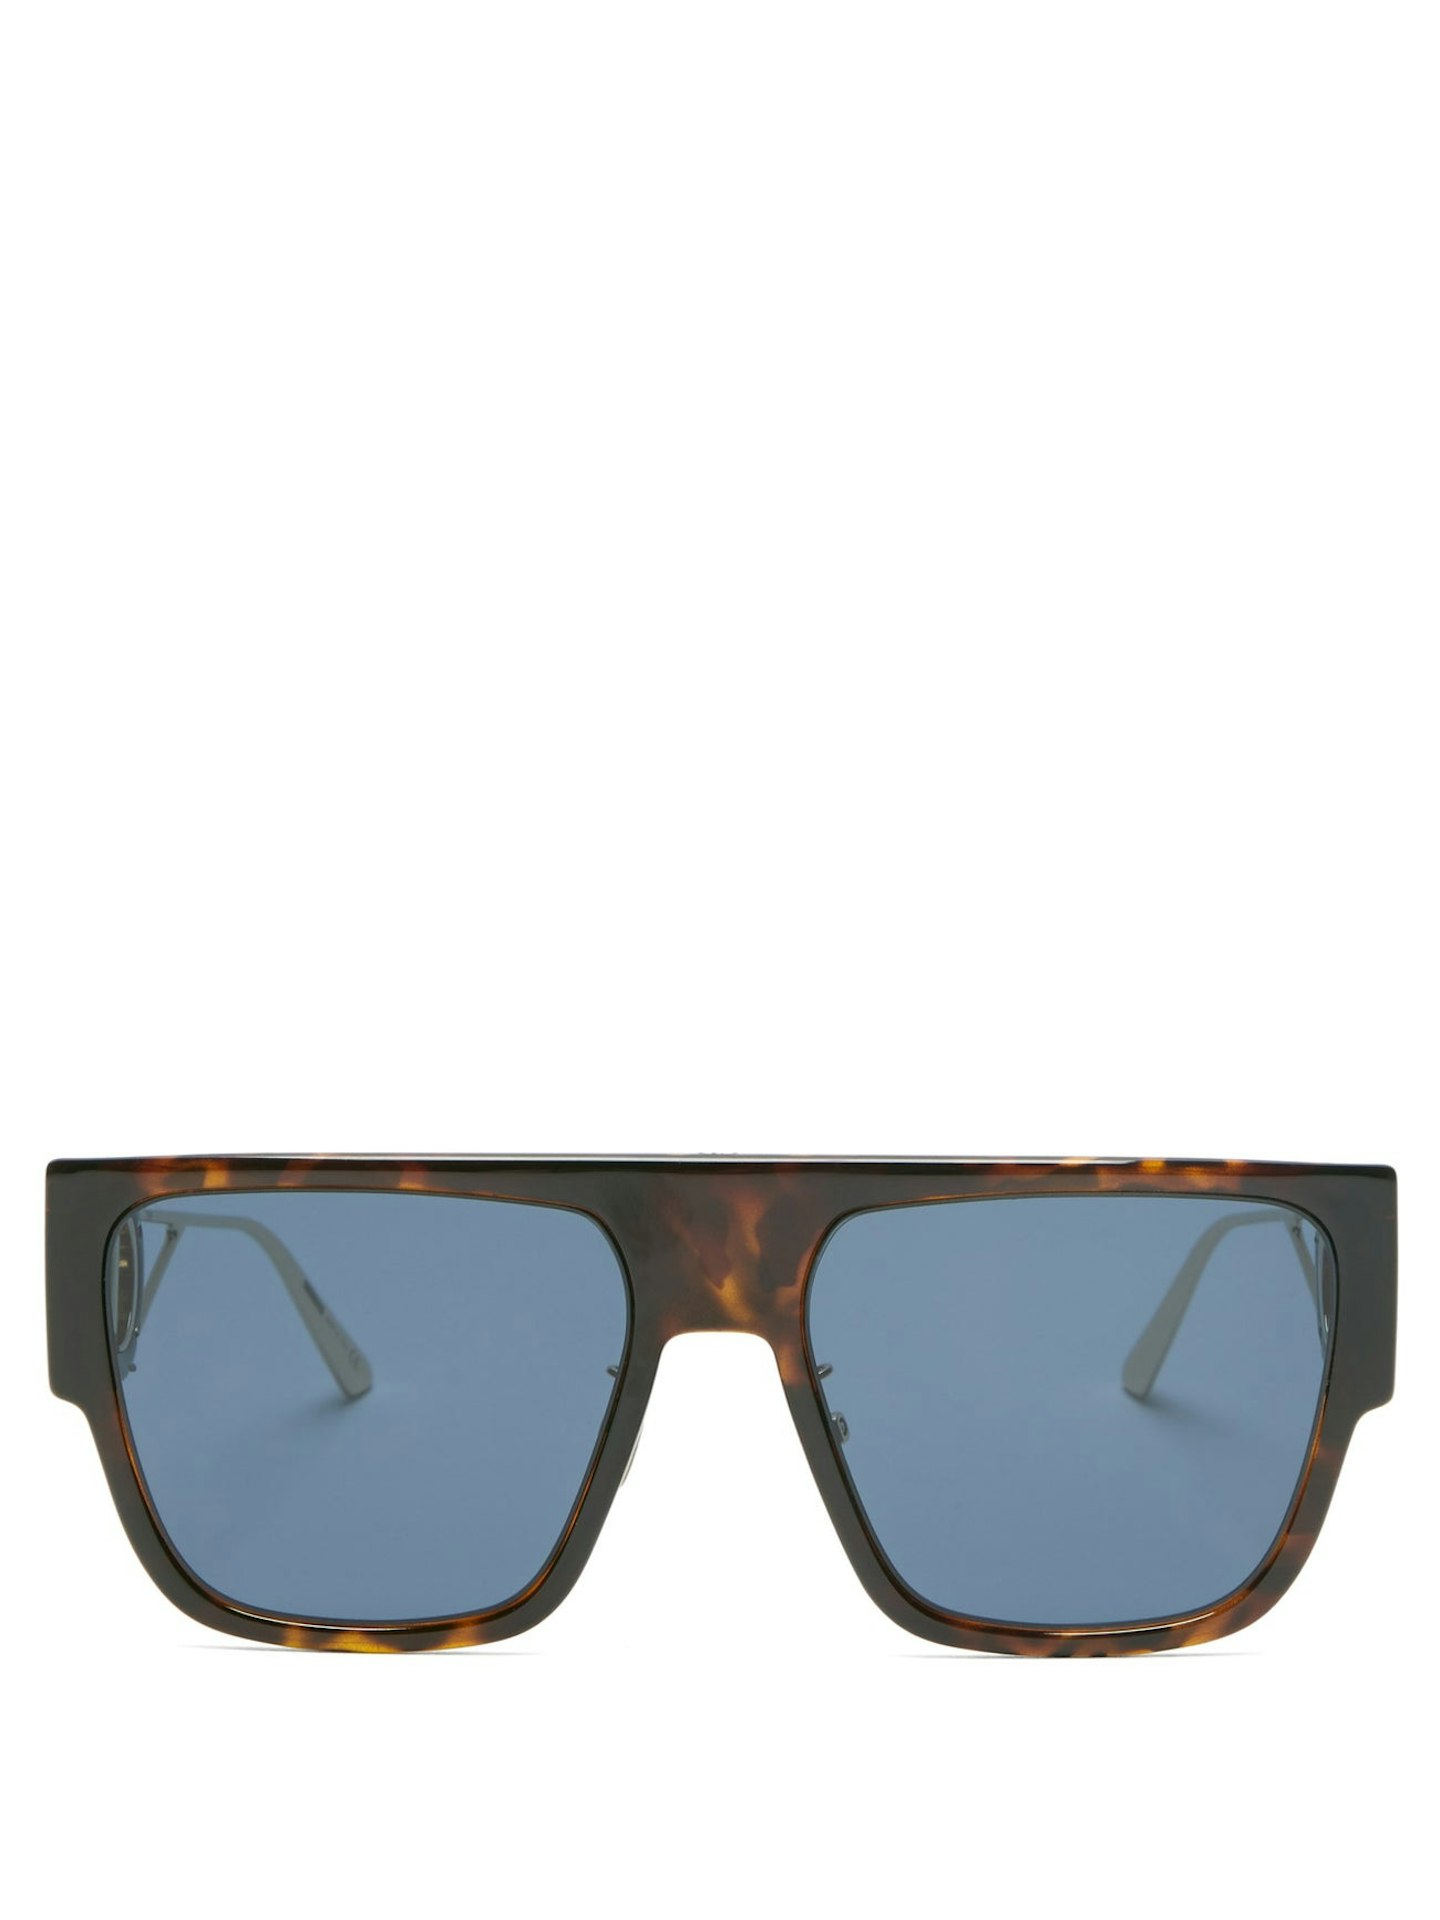 Dior, 30Montaigne D-frame acetate and metal sunglasses, WAS £420 NOW 315